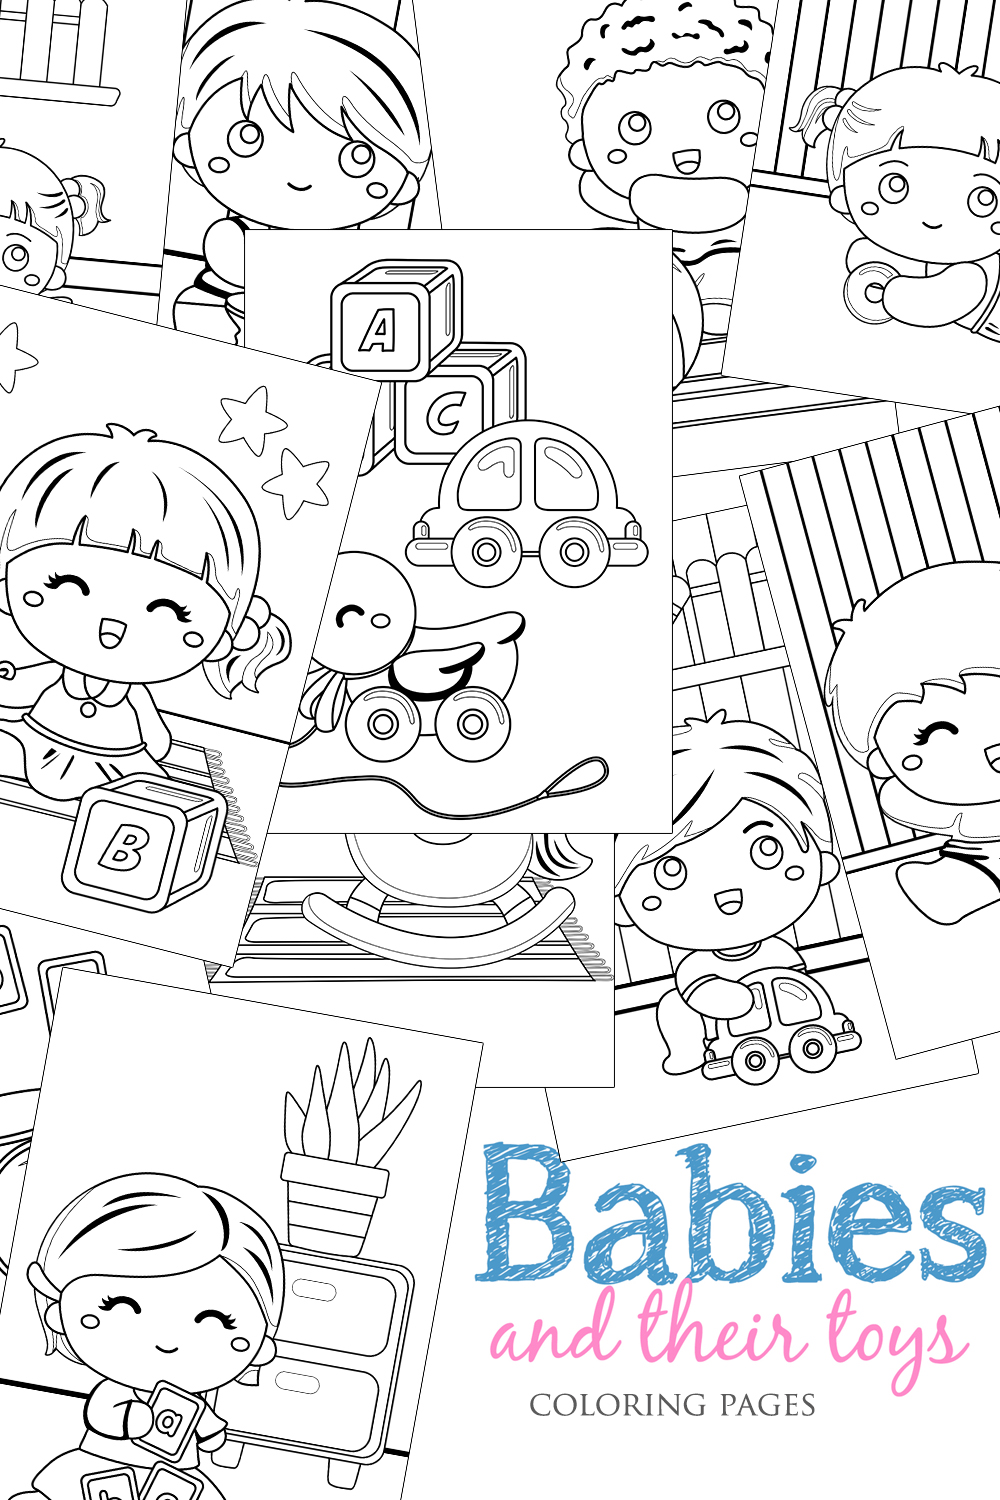 Baby and Toys Coloring Pages Design pinterest image.